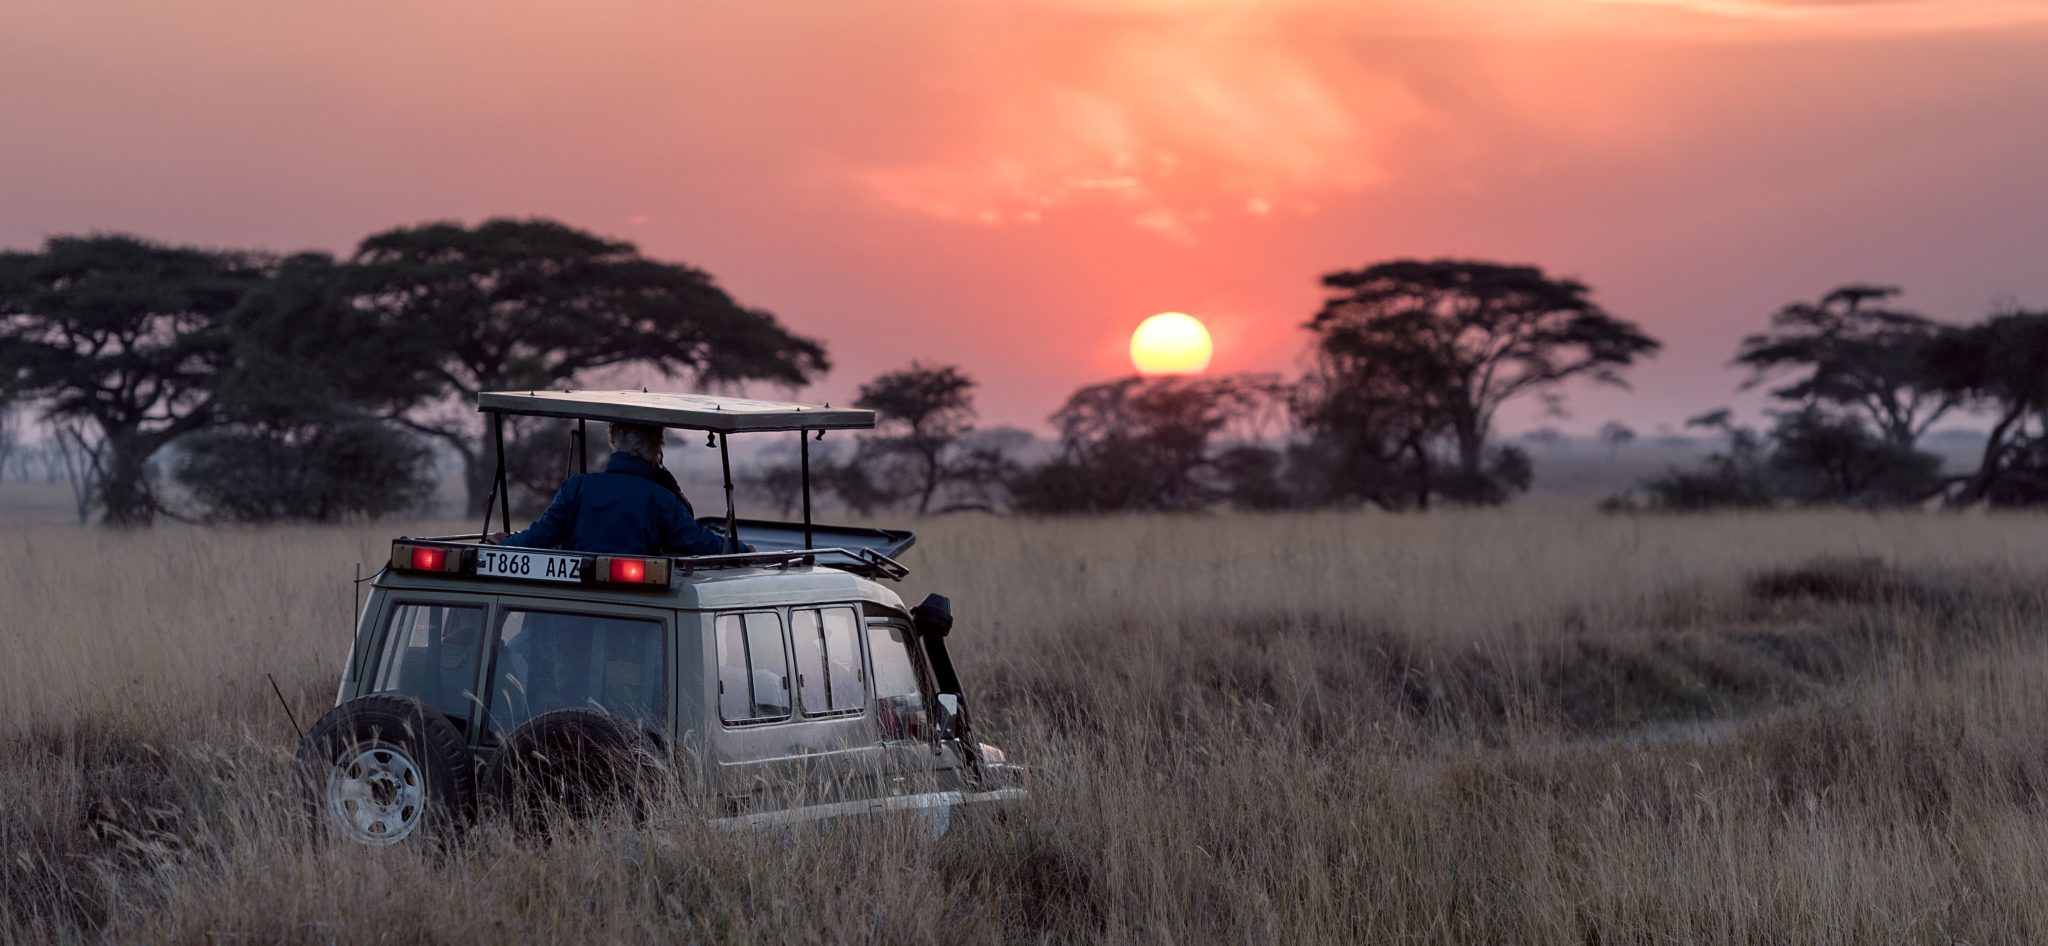 Where to spot the Lion King characters on Safari in Africa